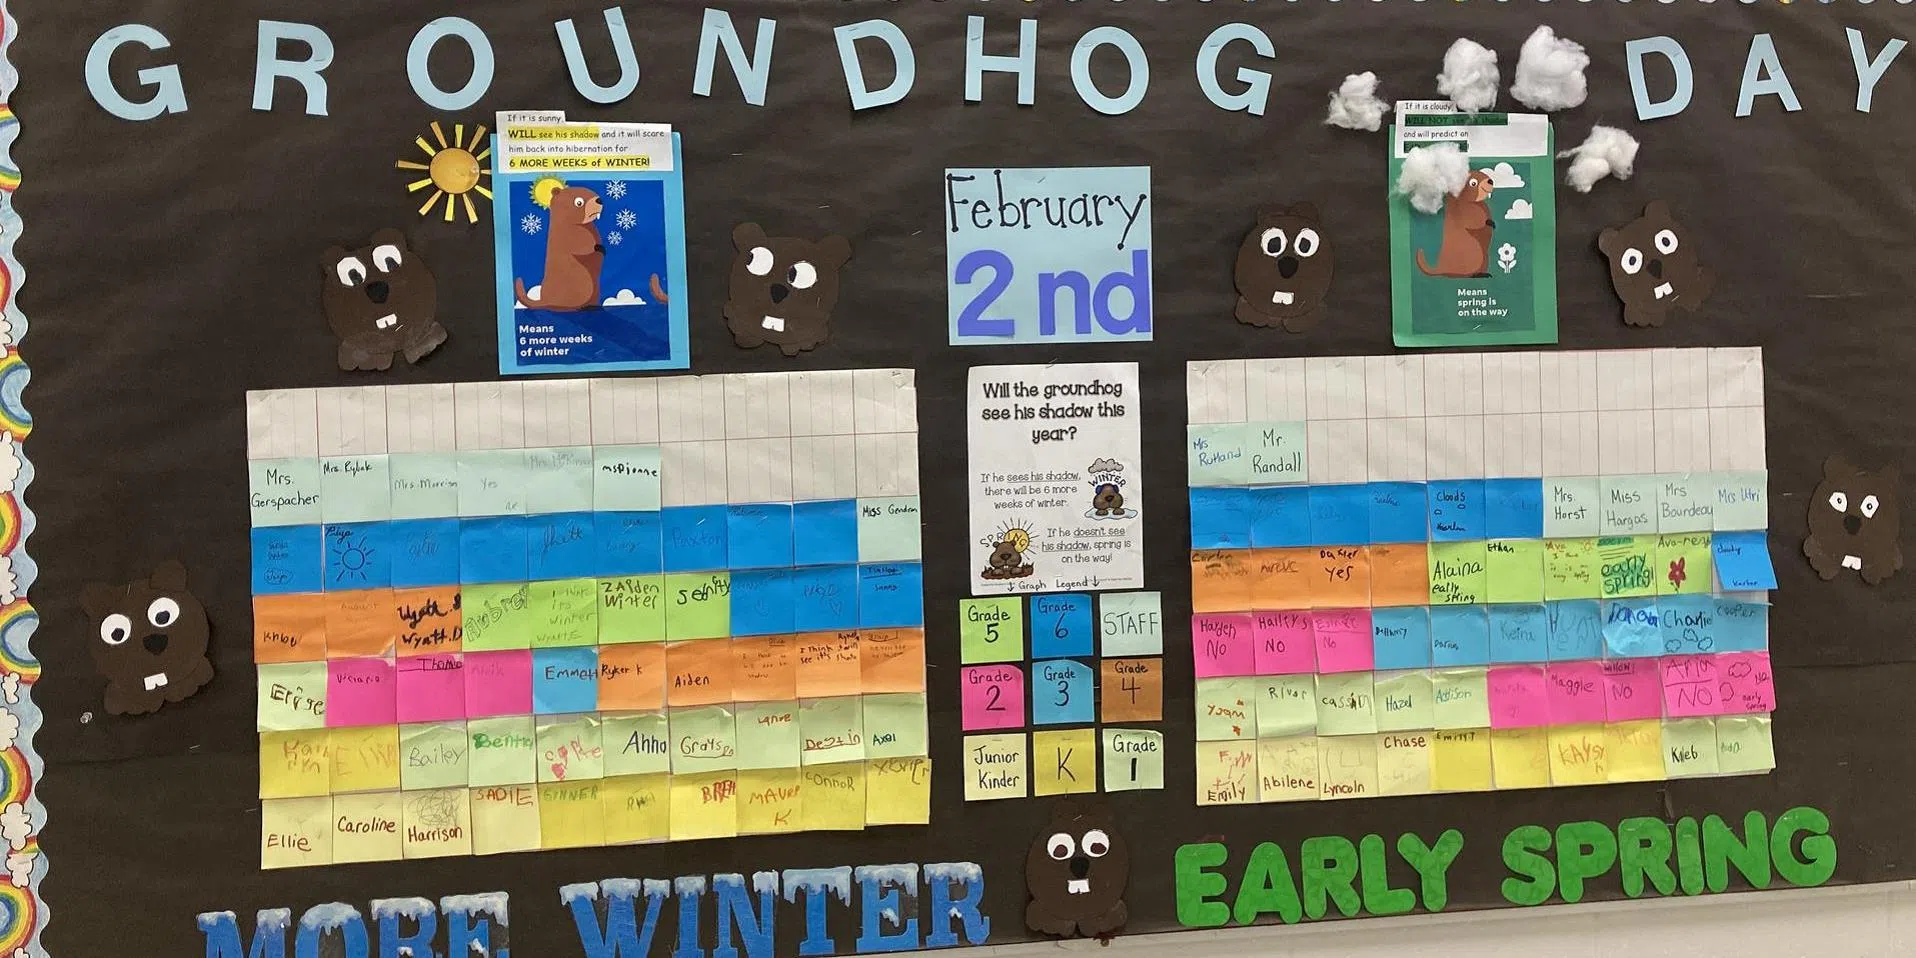 Grande Yellowhead Public School Division students conduct their own Groundhog Day predictions